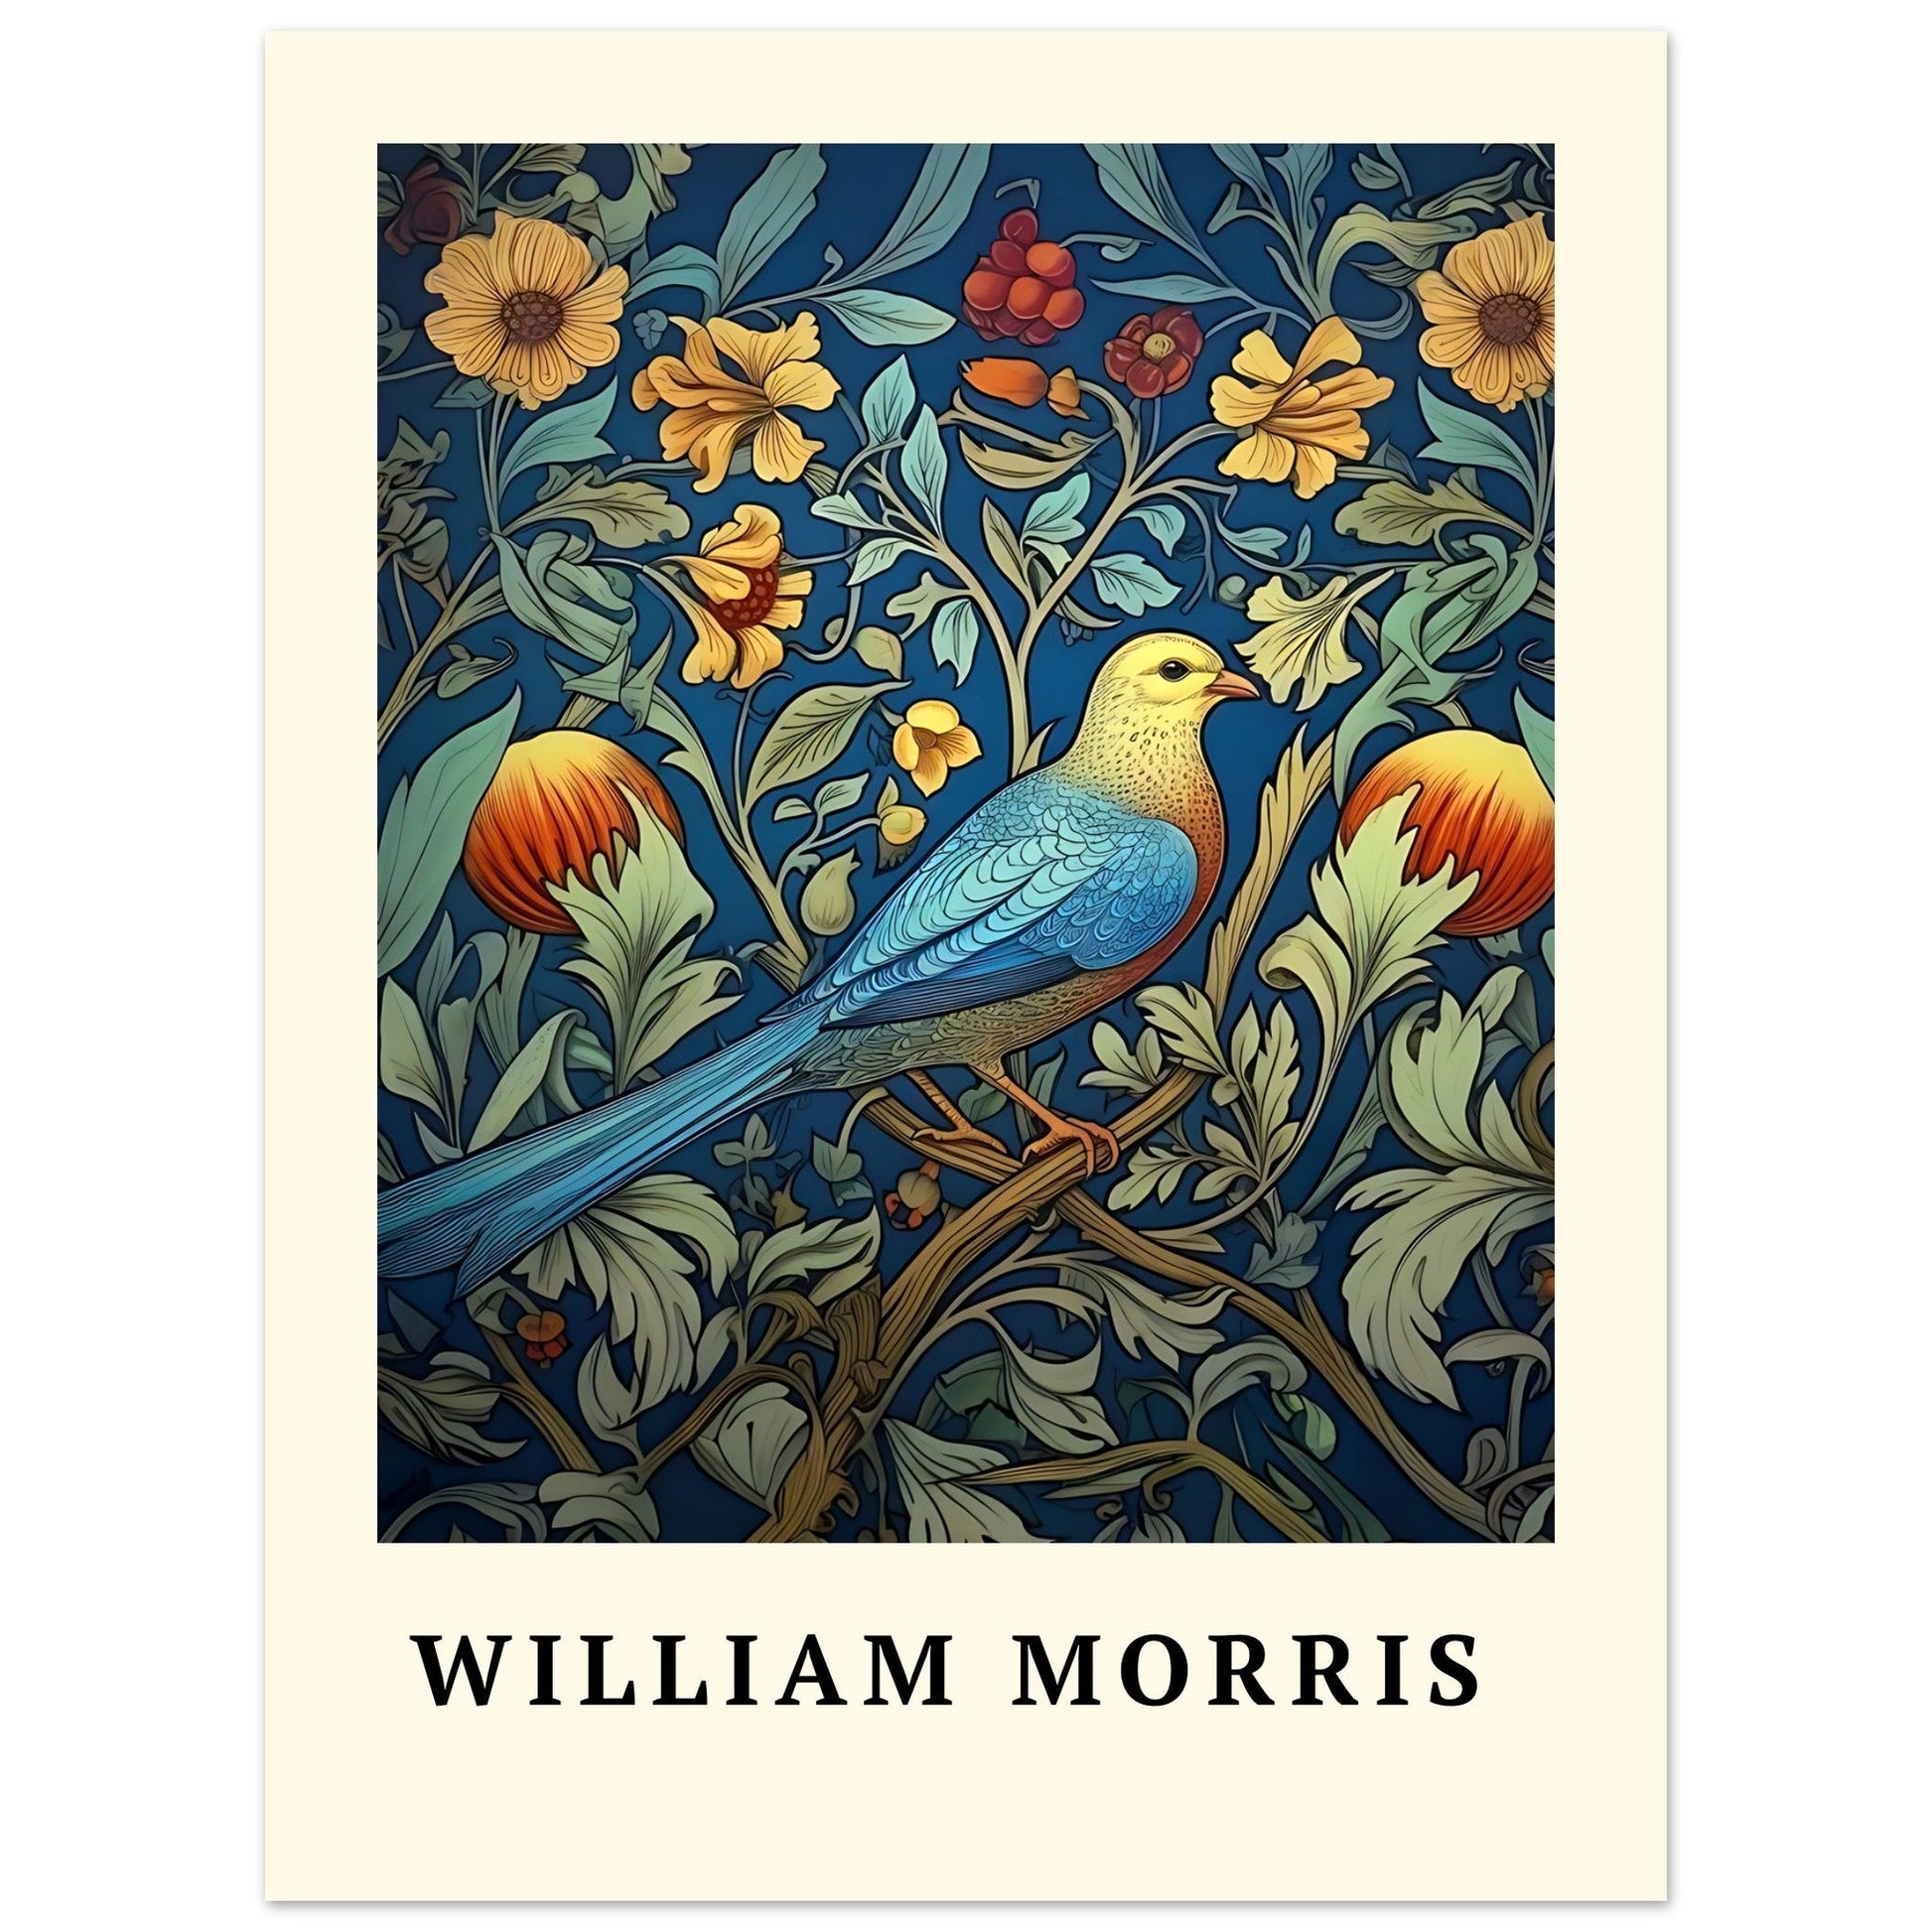 Bird and Fruits - William Morris Art Print, abstract, abstract flowers, animal, #illieeart